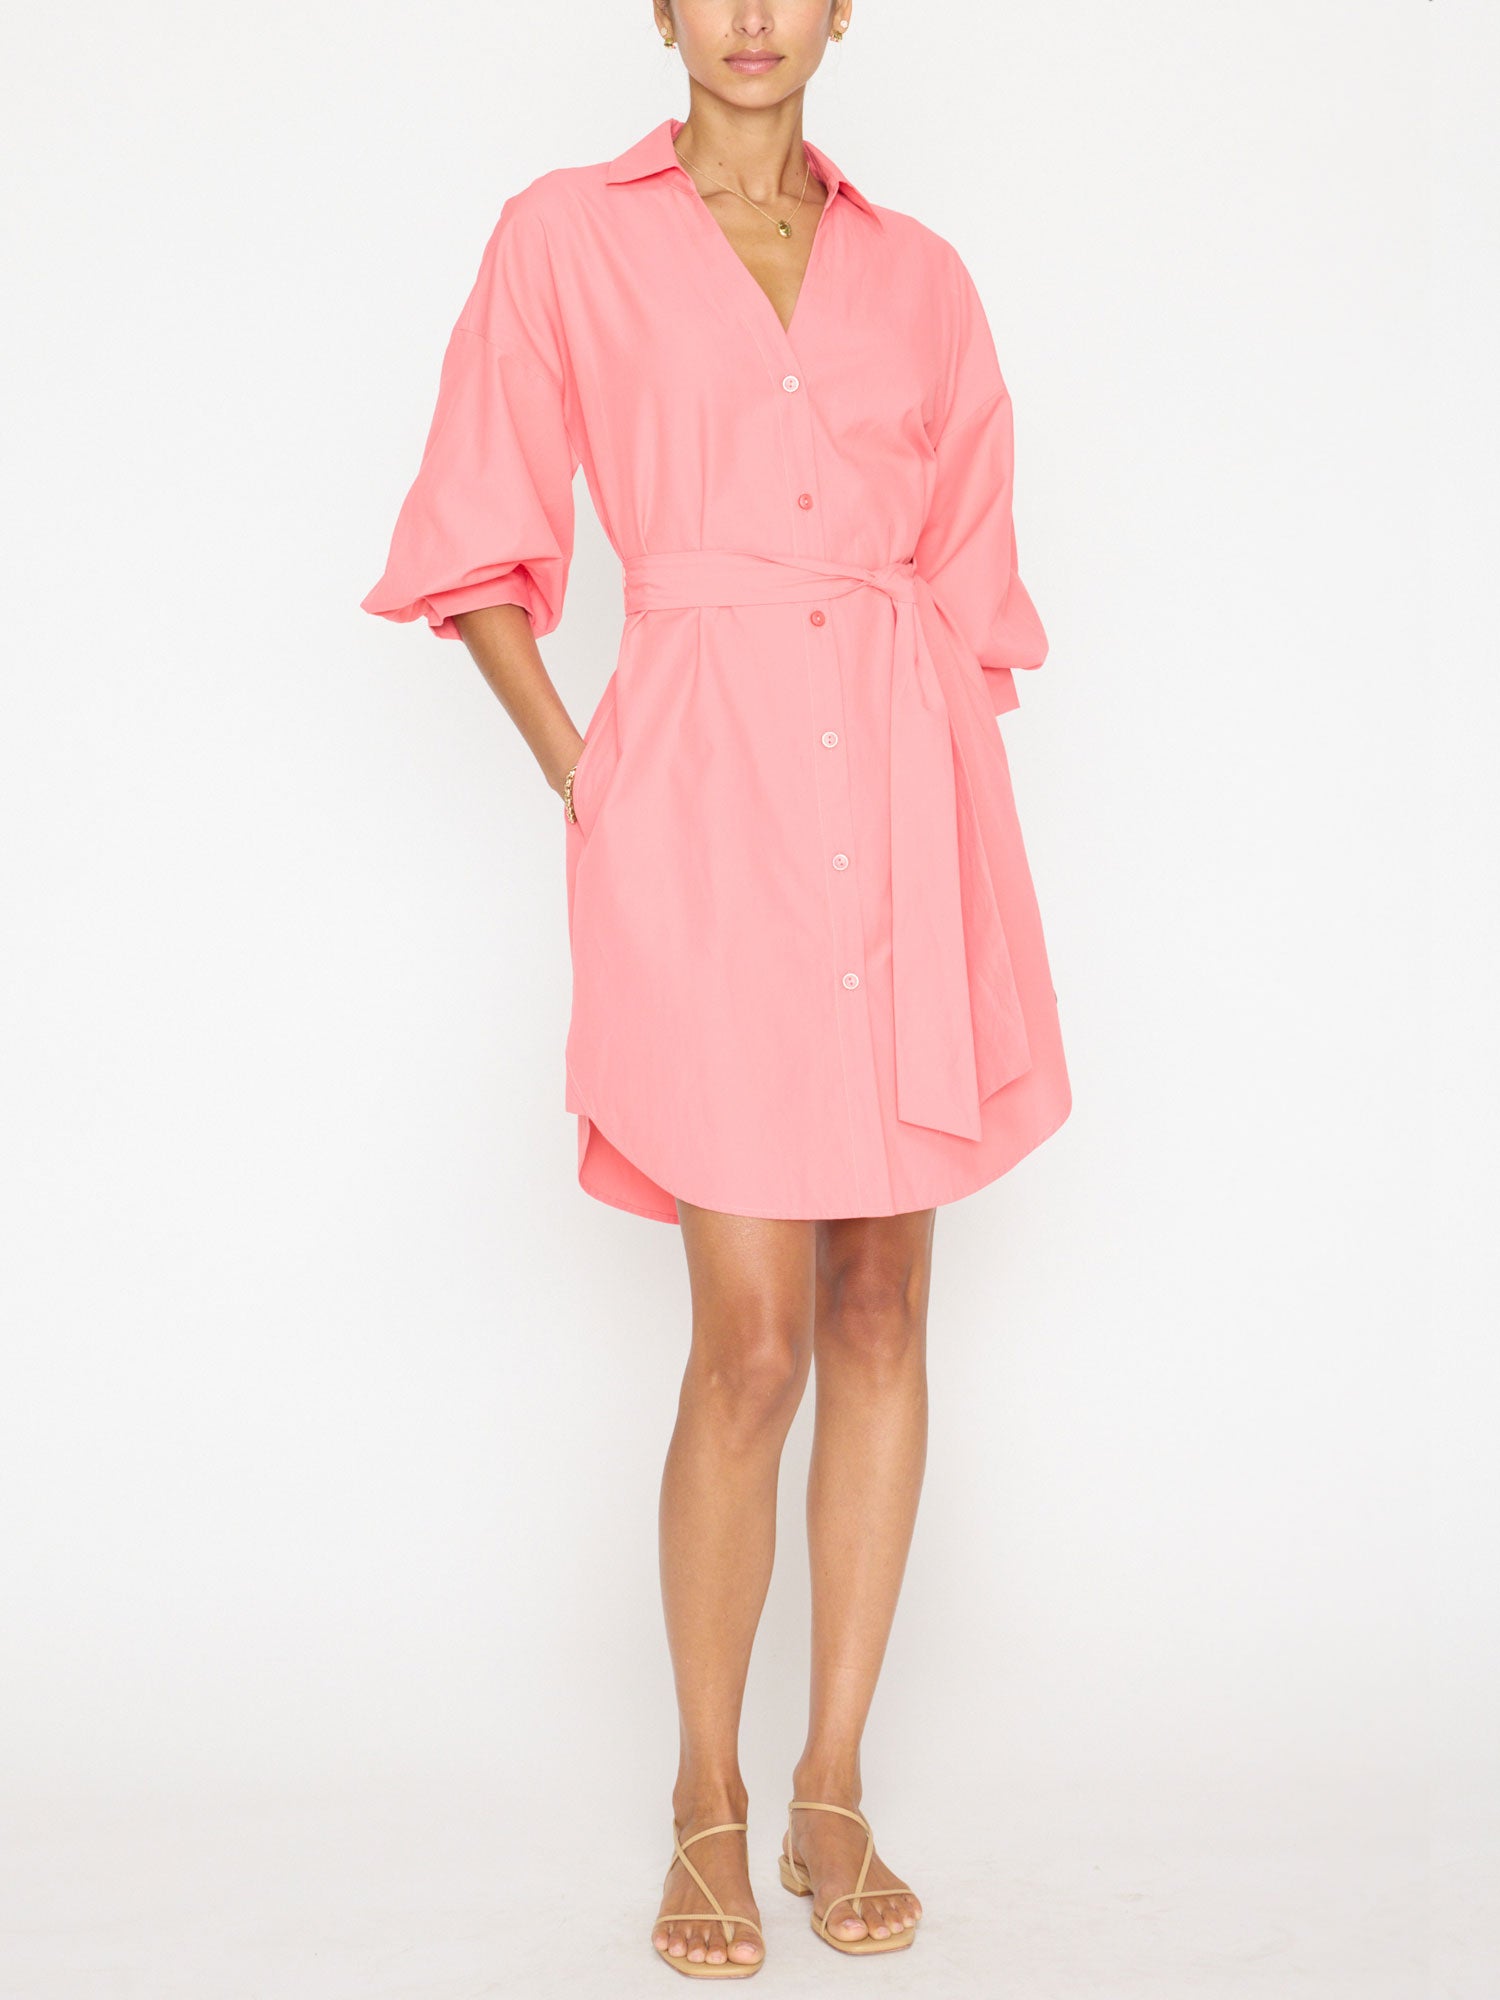 Kate belted button up mini shirtdress pink full view